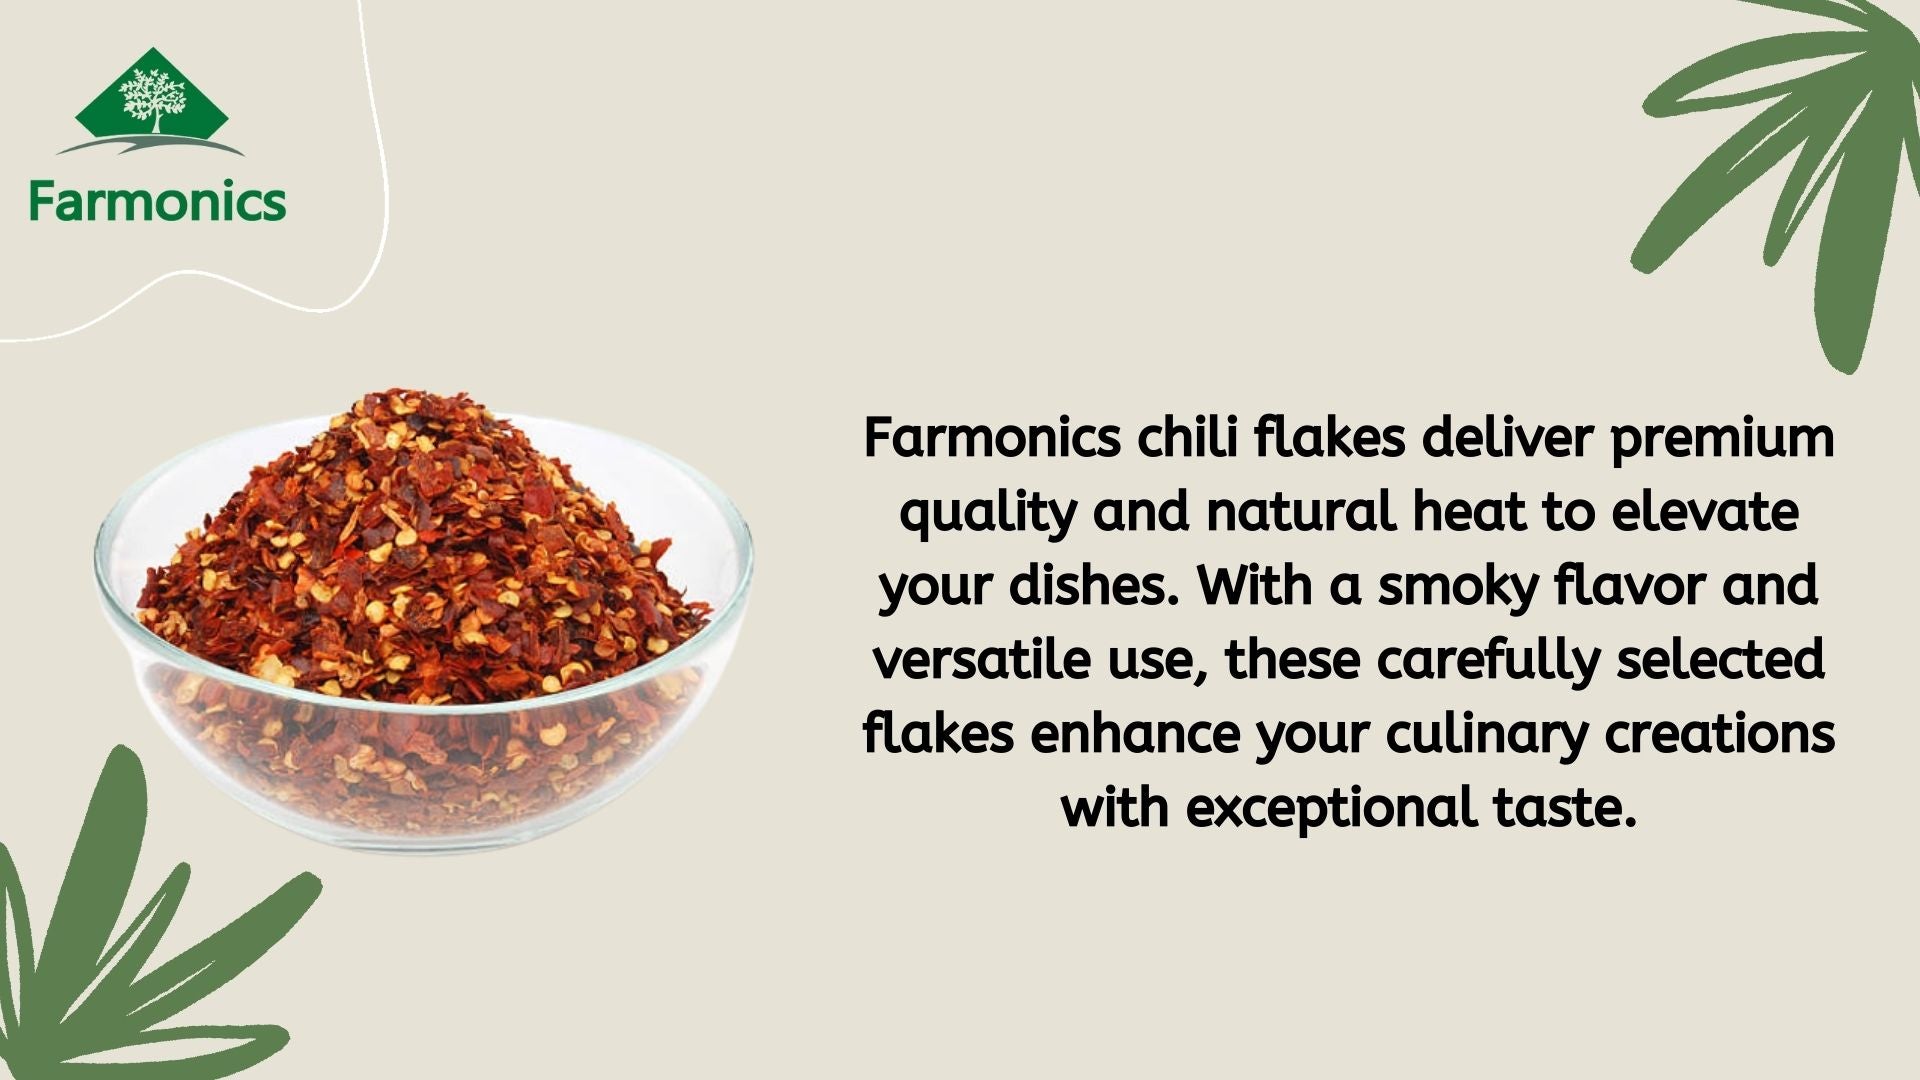 Here are some of the information about Framonics best quality chilli flakes 